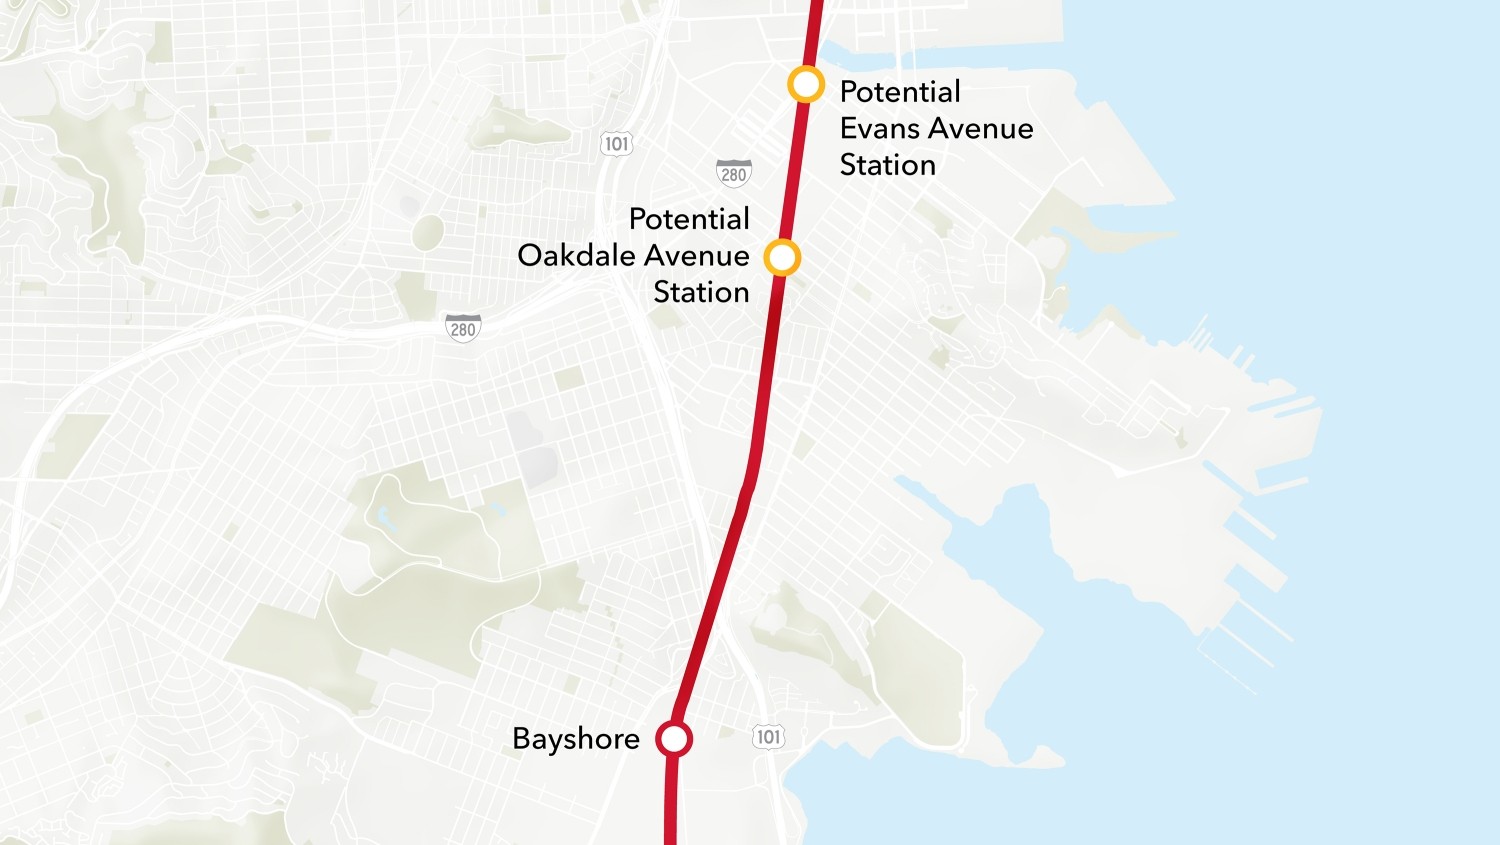 Map of Caltrain stations in the Bayview, showing the existing Bayshore station, as well as new potential stations at Evans Avenue and Oakdale Avenue.